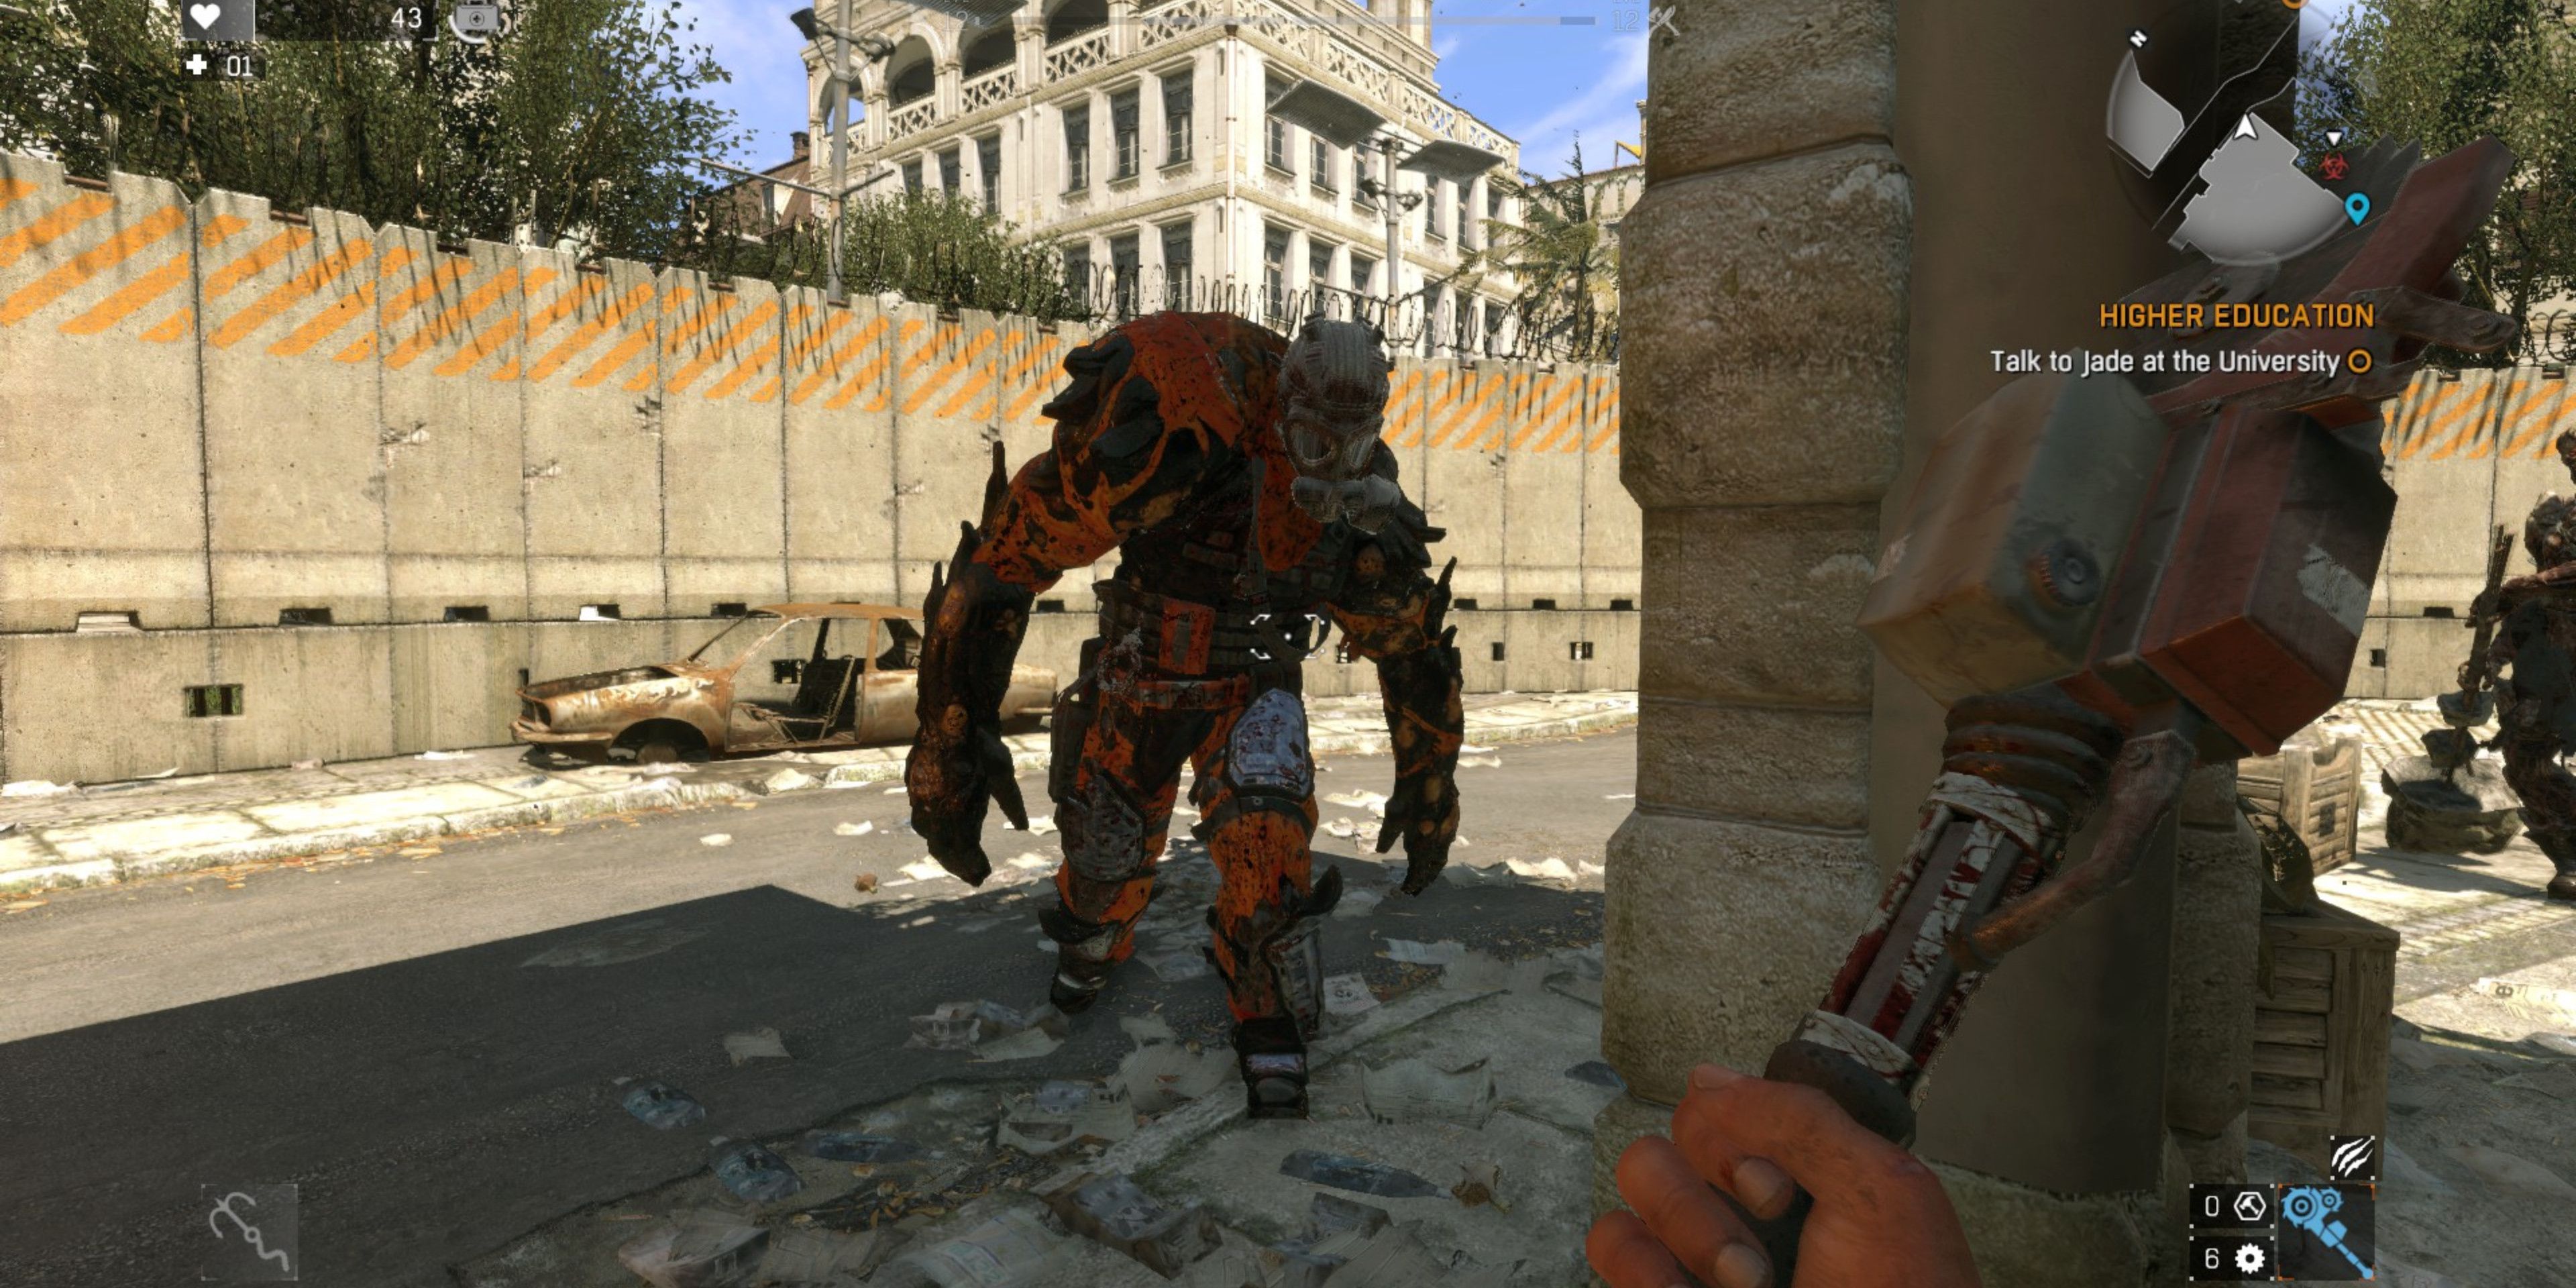 The player faces off against an armored Demolisher beside a barricade in Old Town